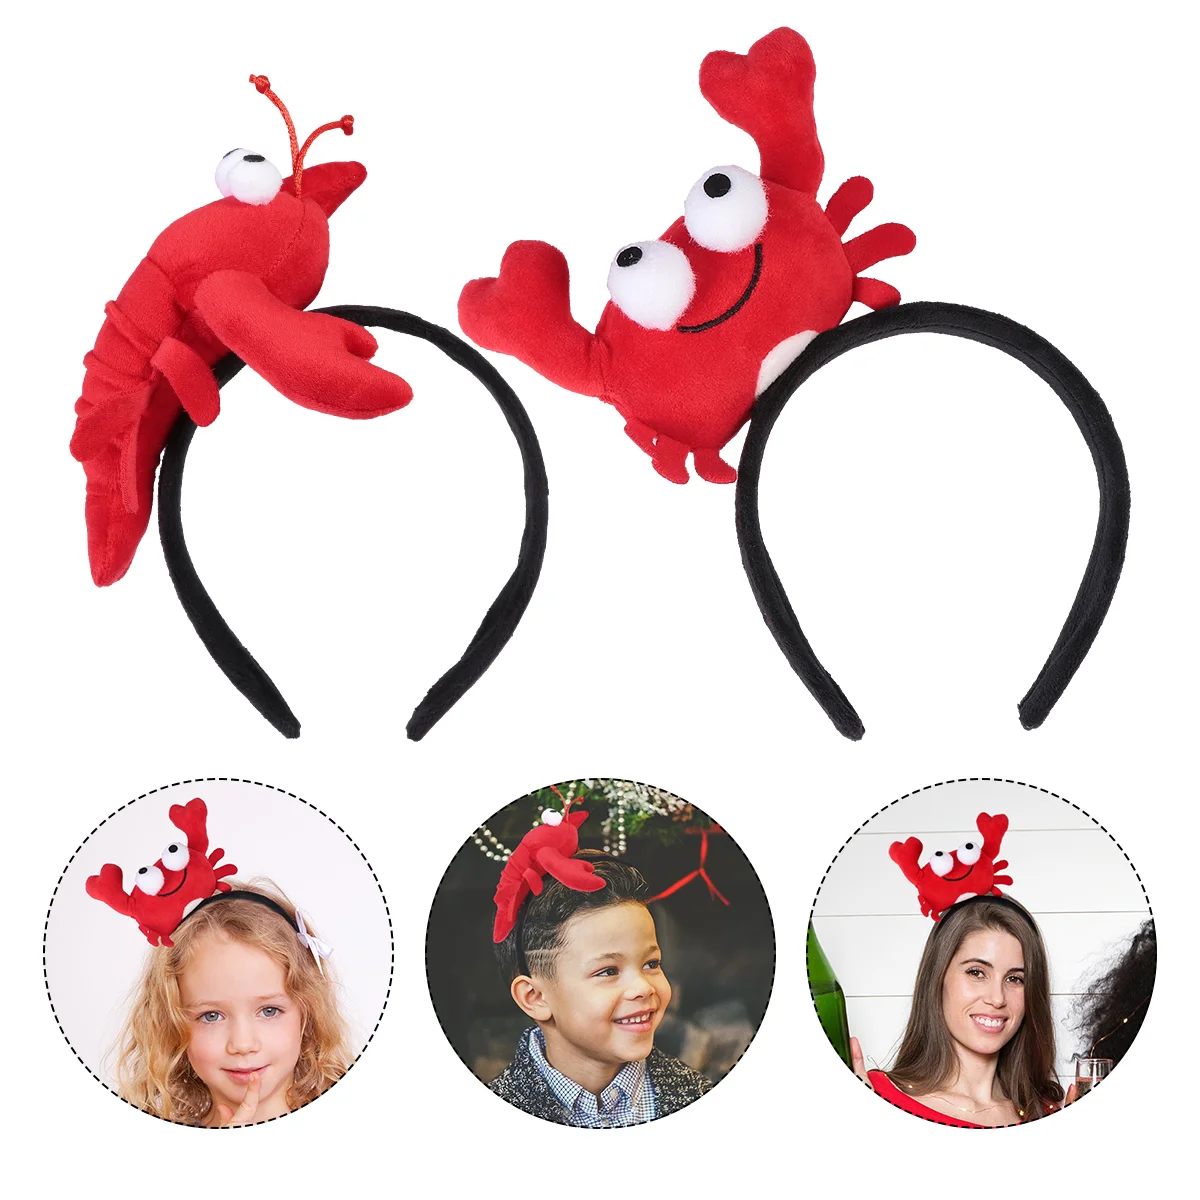 2Pcs Sea Decor Lobster Hairbands Cartoon Headdresses for Party (Lobster+Crab, Red)